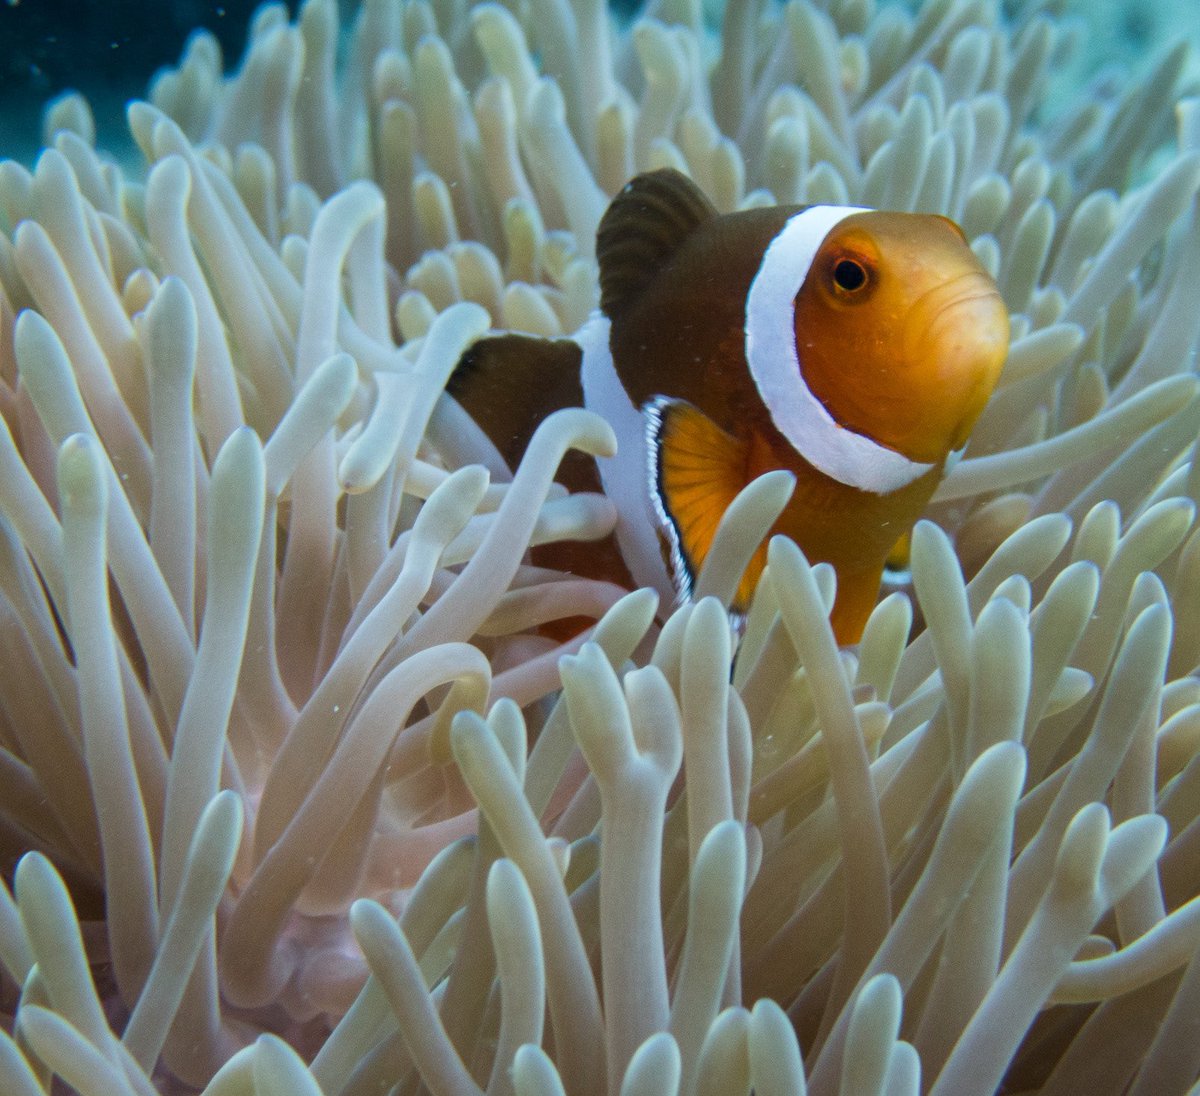 Just a clown fish catching some light. Have a happy weekend you all!! #clownfish #anemone @PADI